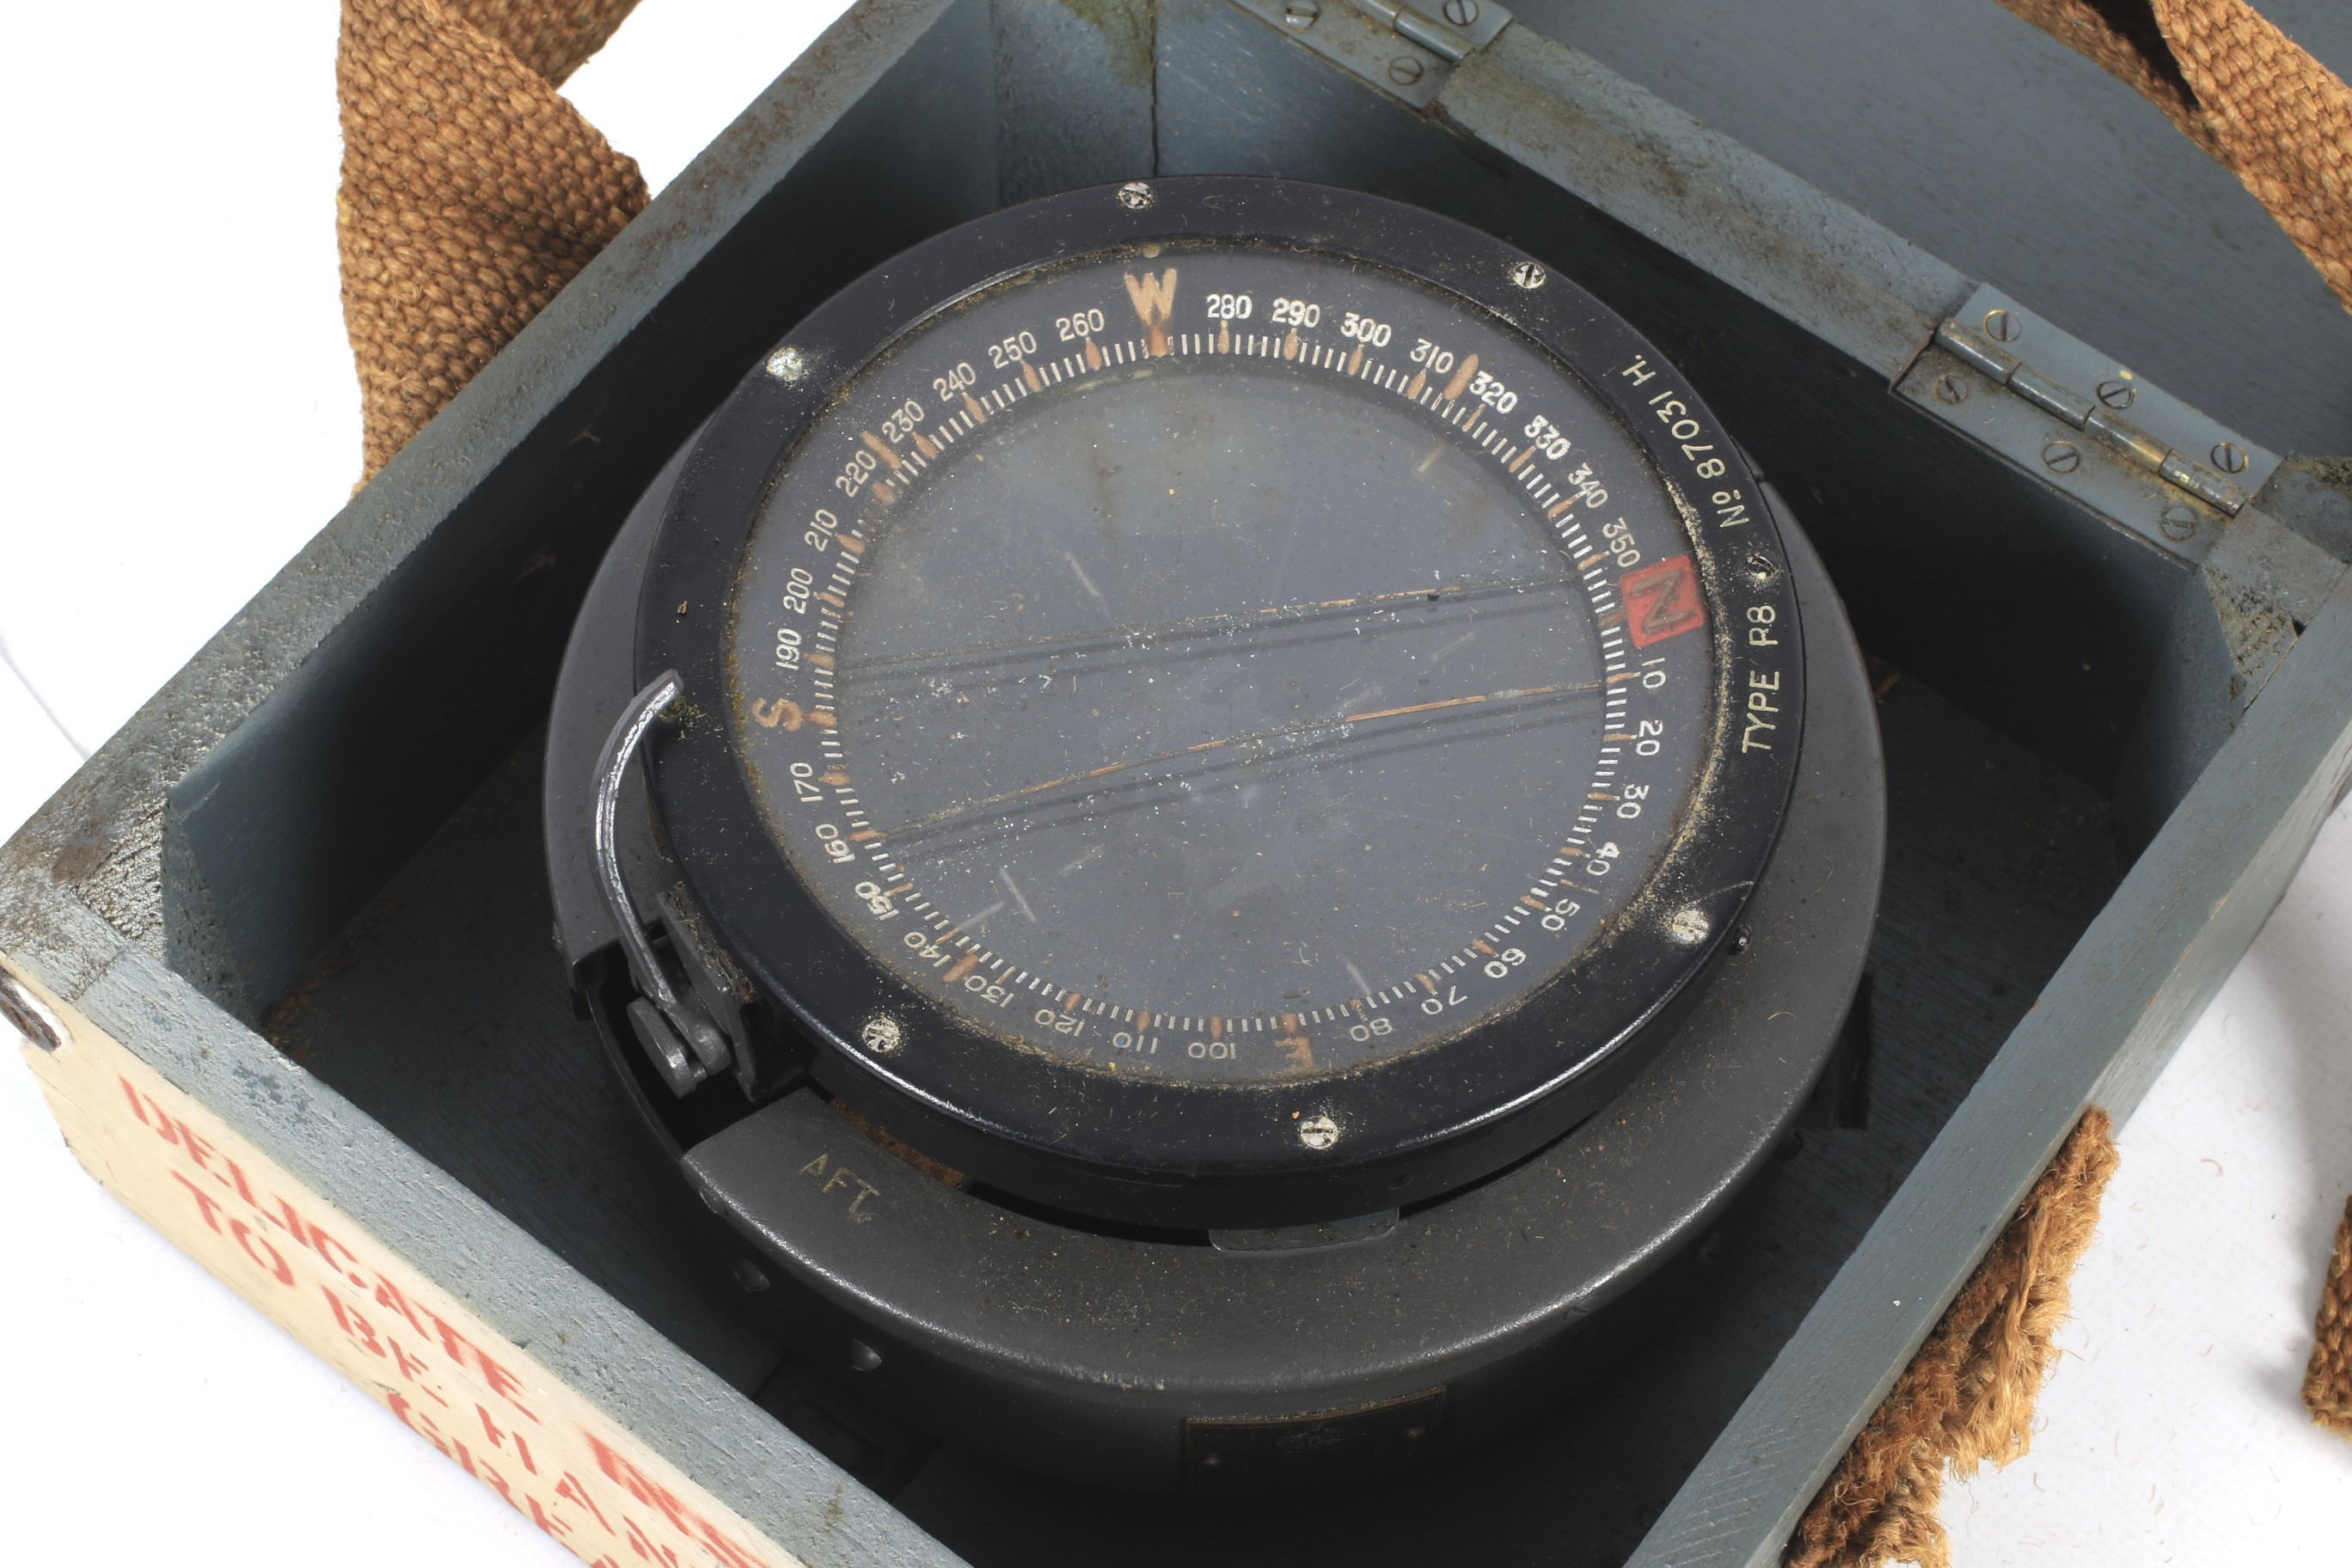 A military AFT compass TYPE P8, No 87031 H. In a wooden case. - Image 2 of 3